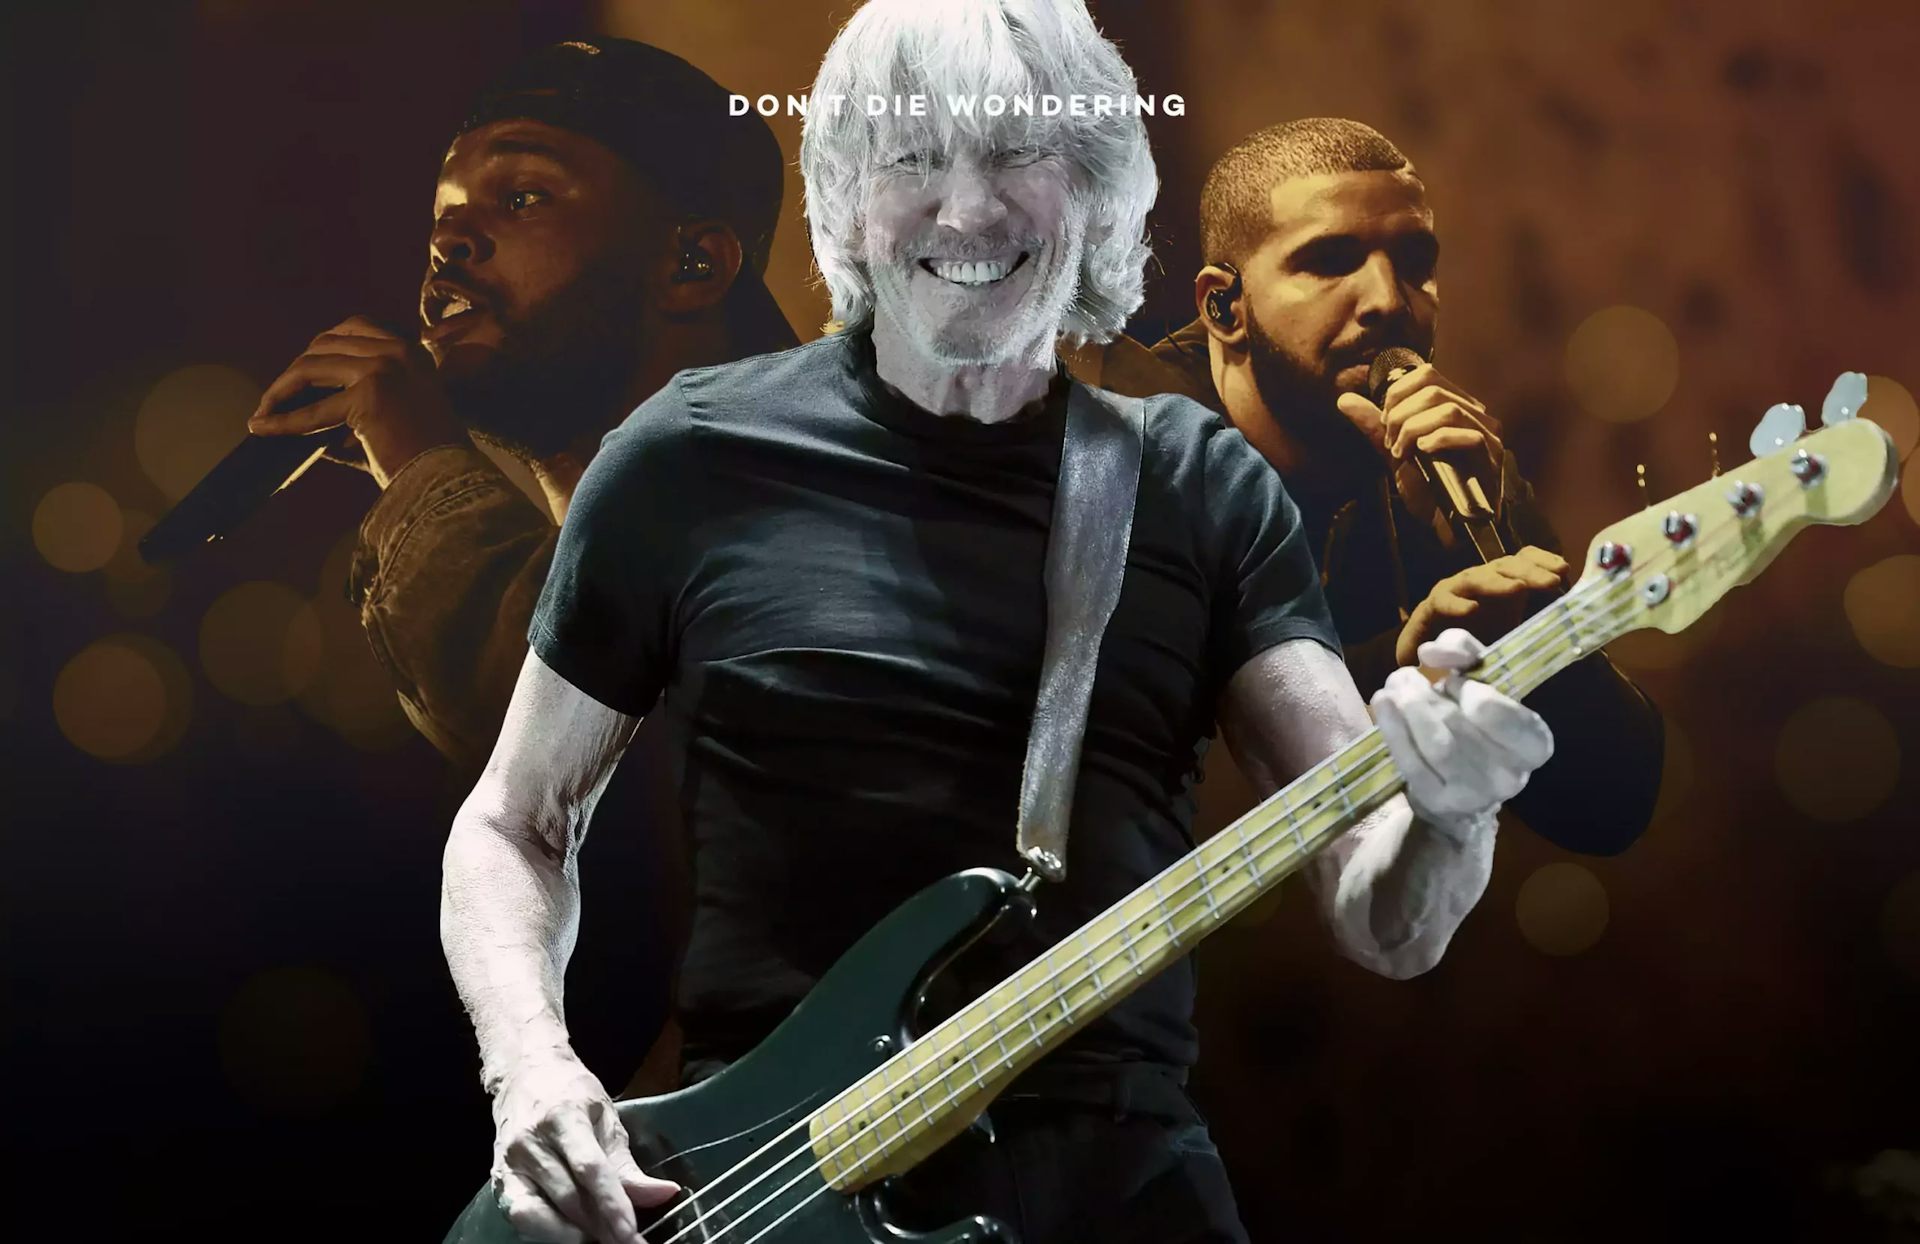 Pink Floyd’s Roger Waters is more important than Drake and The Weeknd